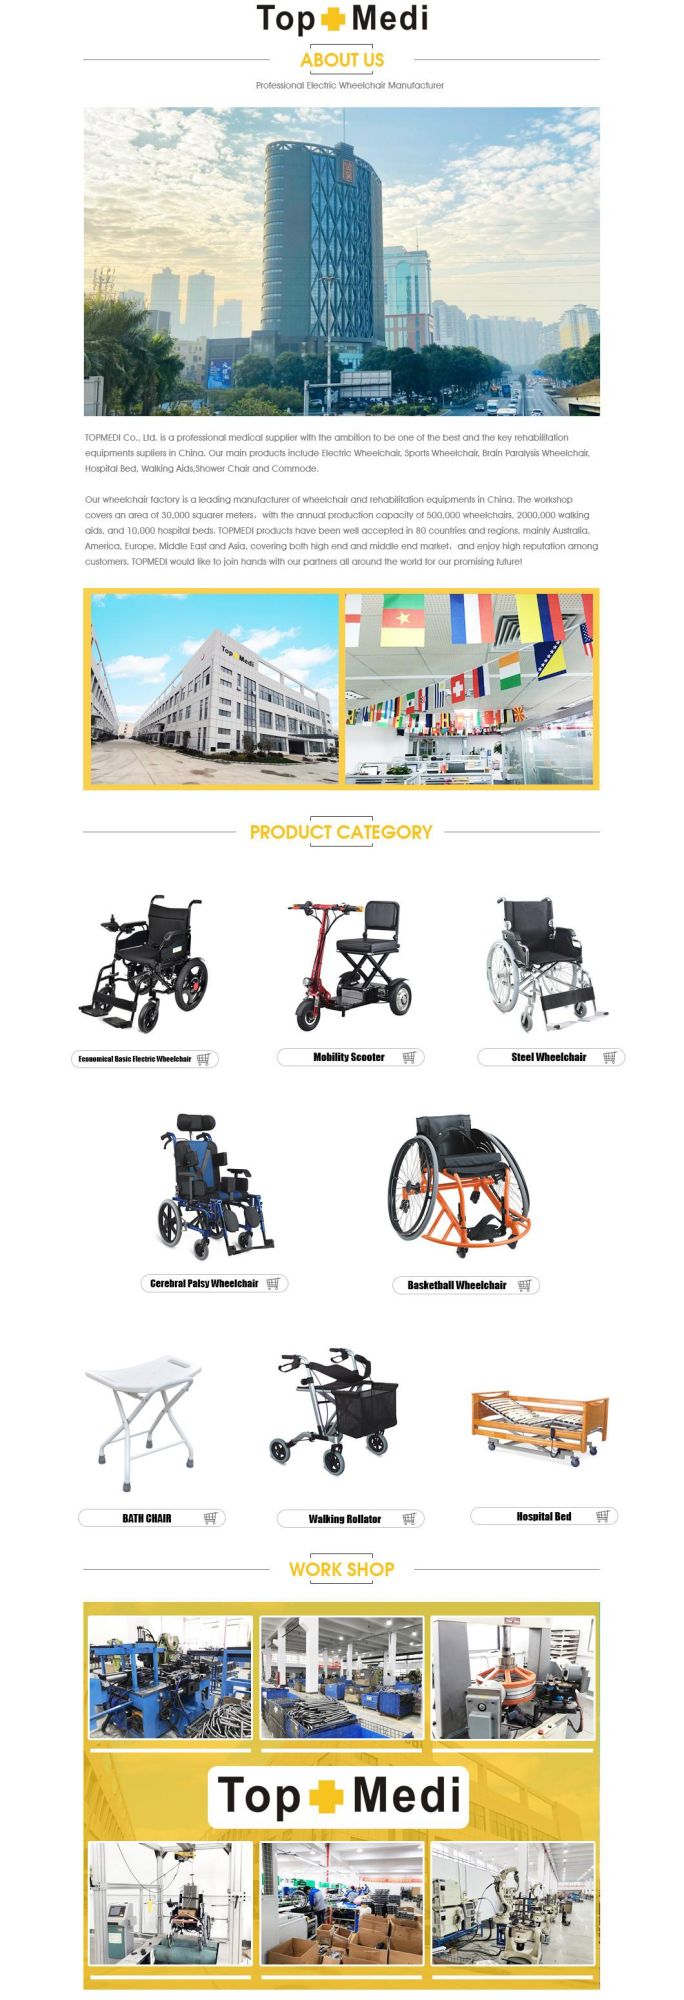 Electric Wheelchair Foldable and Lightweight Manual Wheel Chair Portable Elderly Care Products